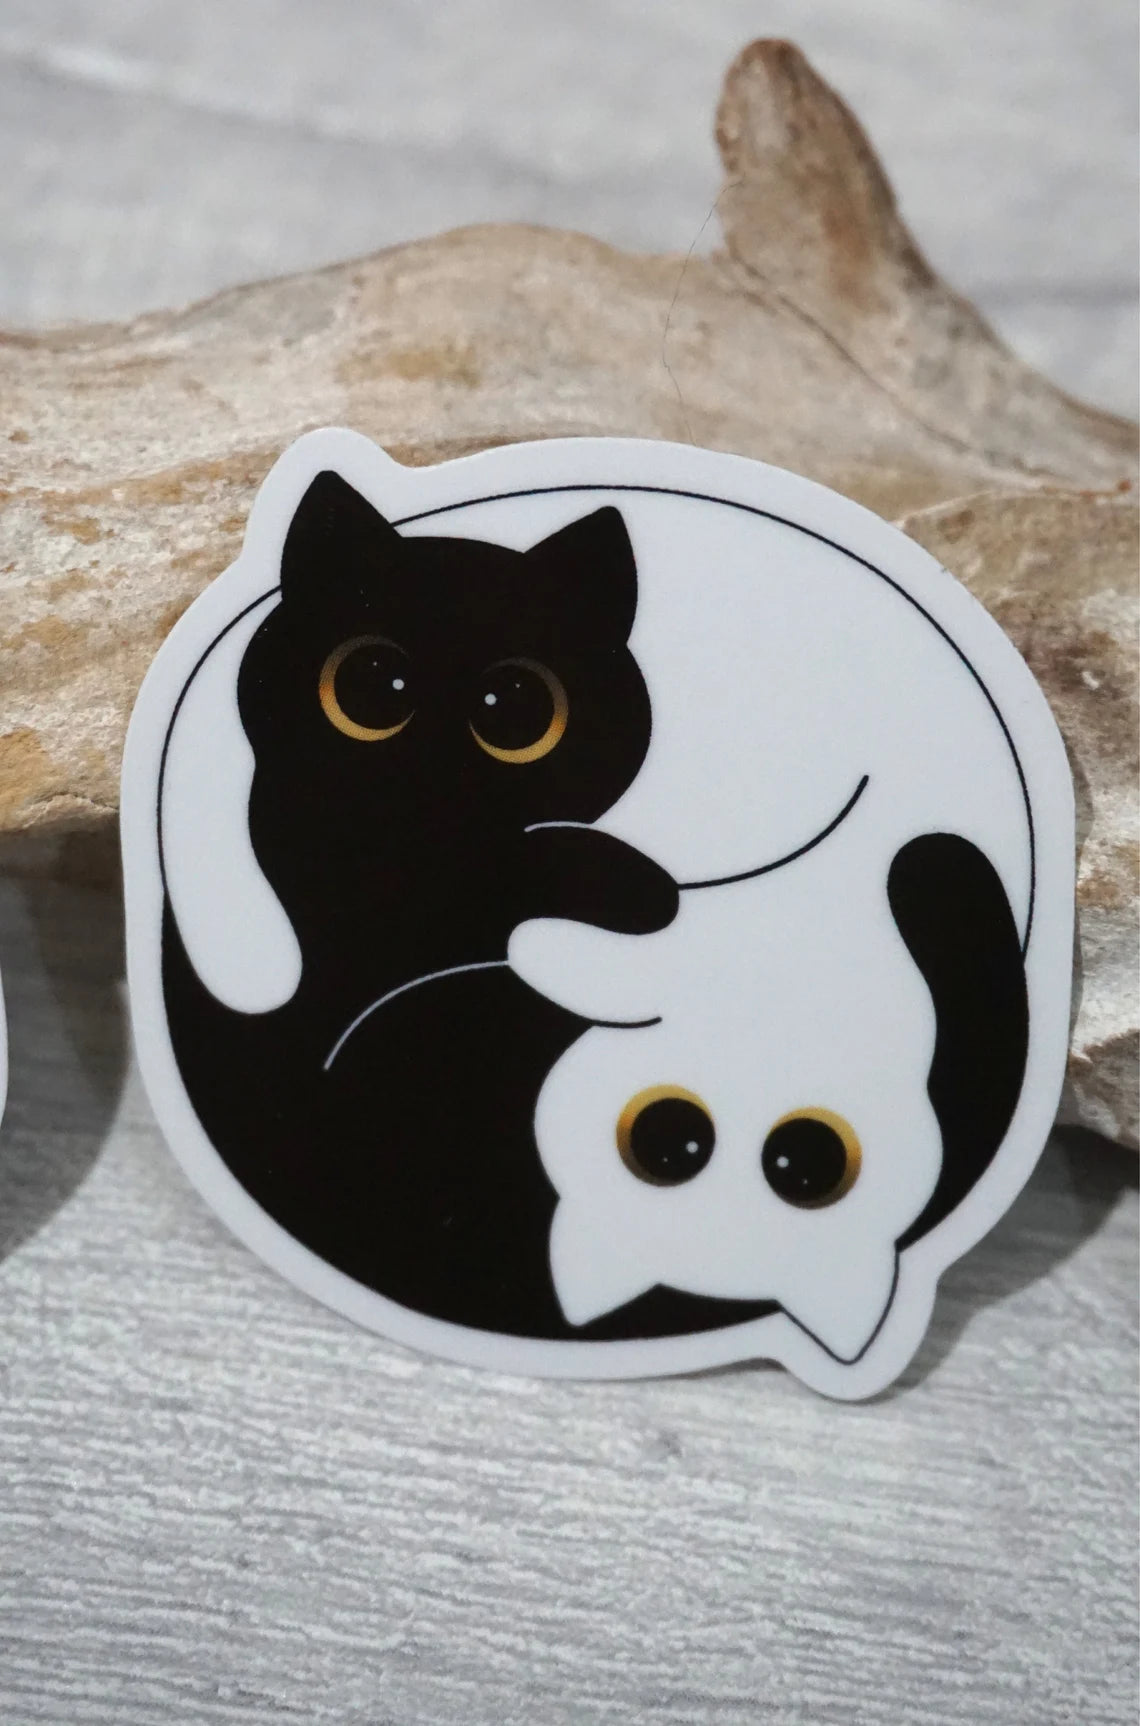 Sticker "Yin and Yang kittens" yellow eyes from End of Horizon